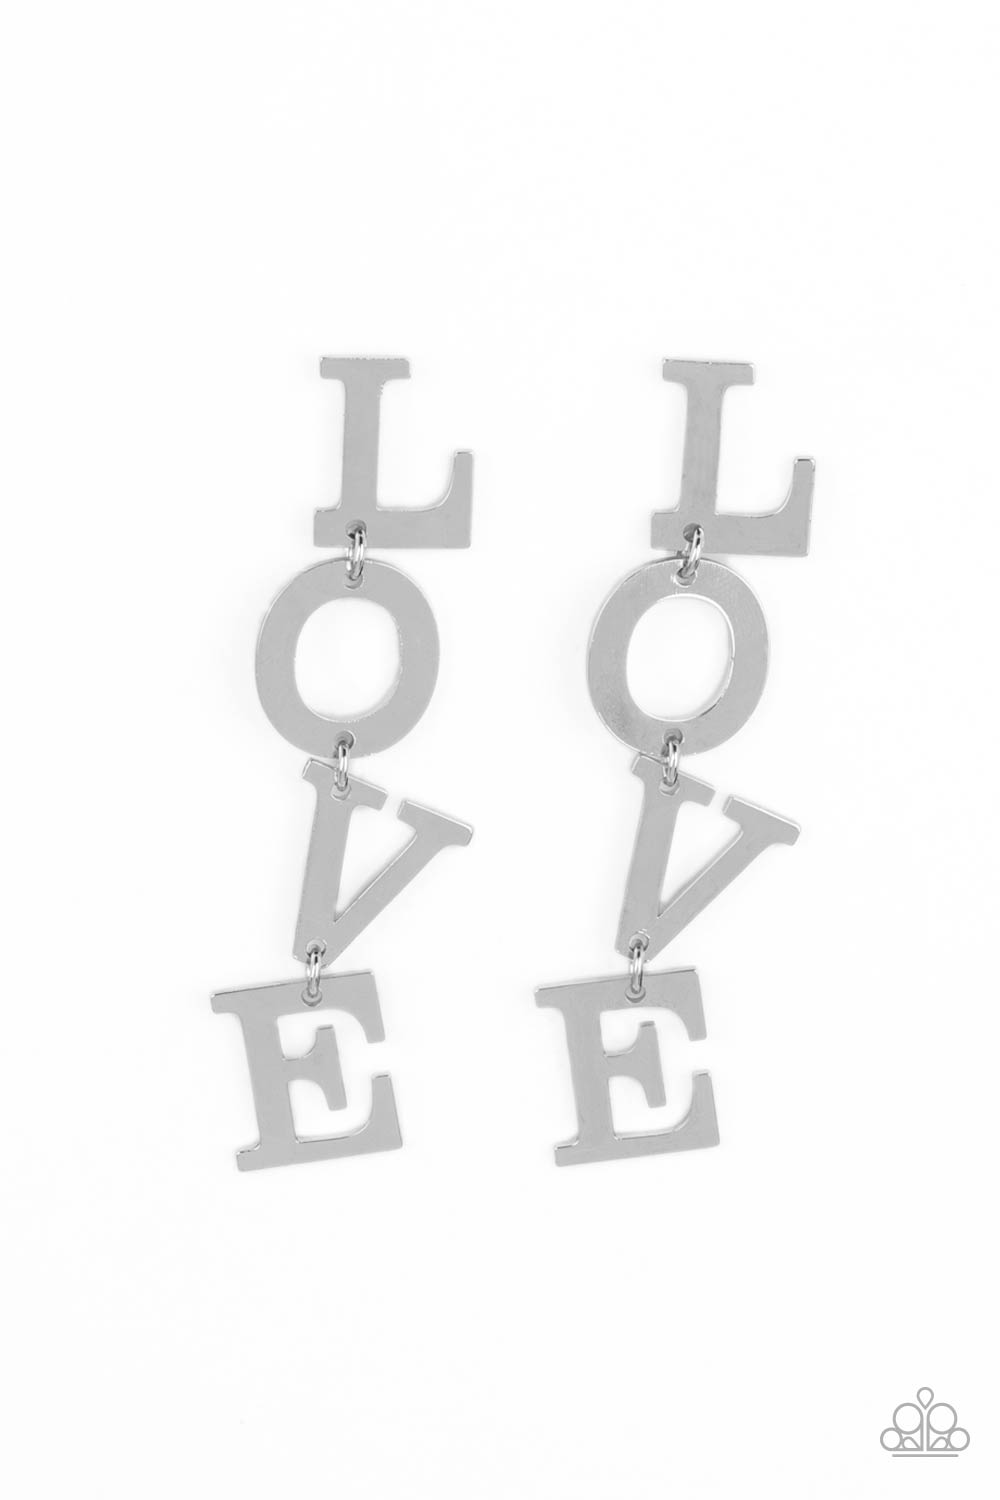 L-O-V-E Silver Earrings - Paparazzi Accessories- lightbox - CarasShop.com - $5 Jewelry by Cara Jewels